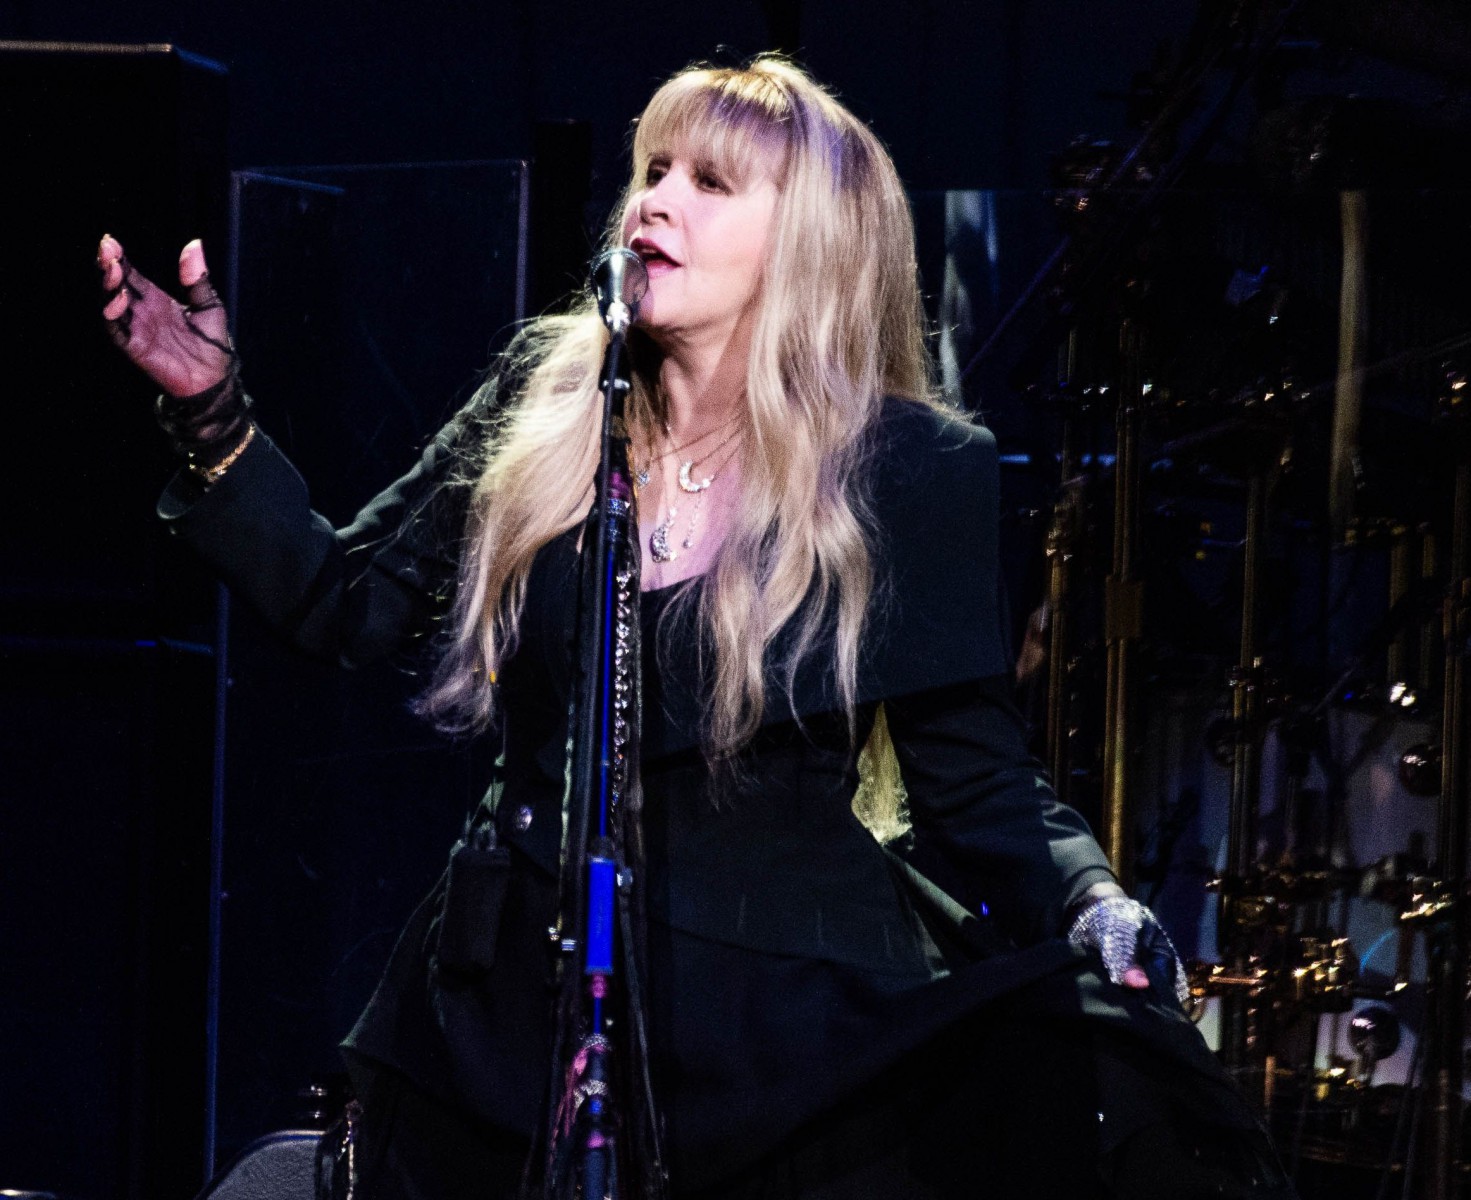 Stevie Nicks said she was affected and touched by the film Twilight